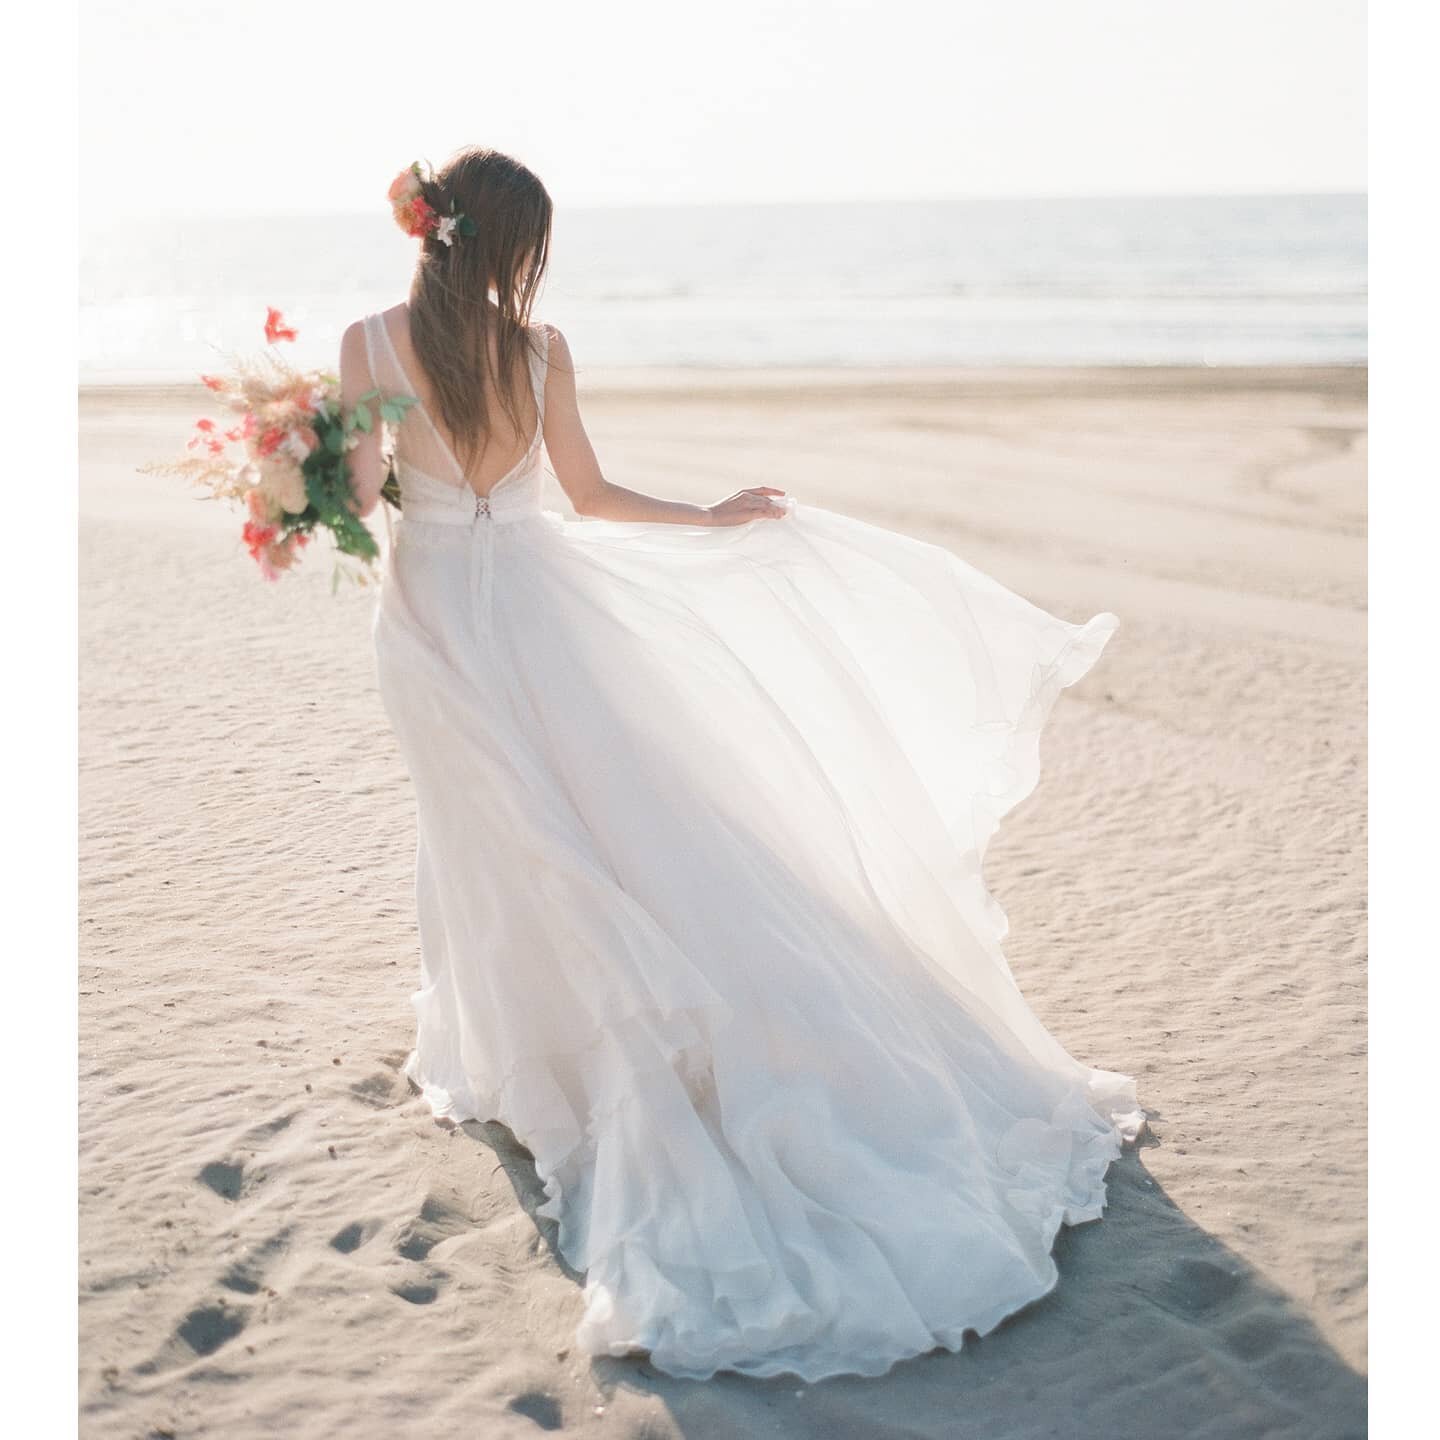 &quot;CLUNY&quot; is dancing on the Lido beach !
Shooting featured in @magnoliarouge 
Photo: @maddy.christina.photographer Planning &amp; Design : @emagiangrecoweddings 
Flowers;  @prettyflowers.fioreriasanrocco 
Venue: @excelsiorvenice 
Cake  @pasti